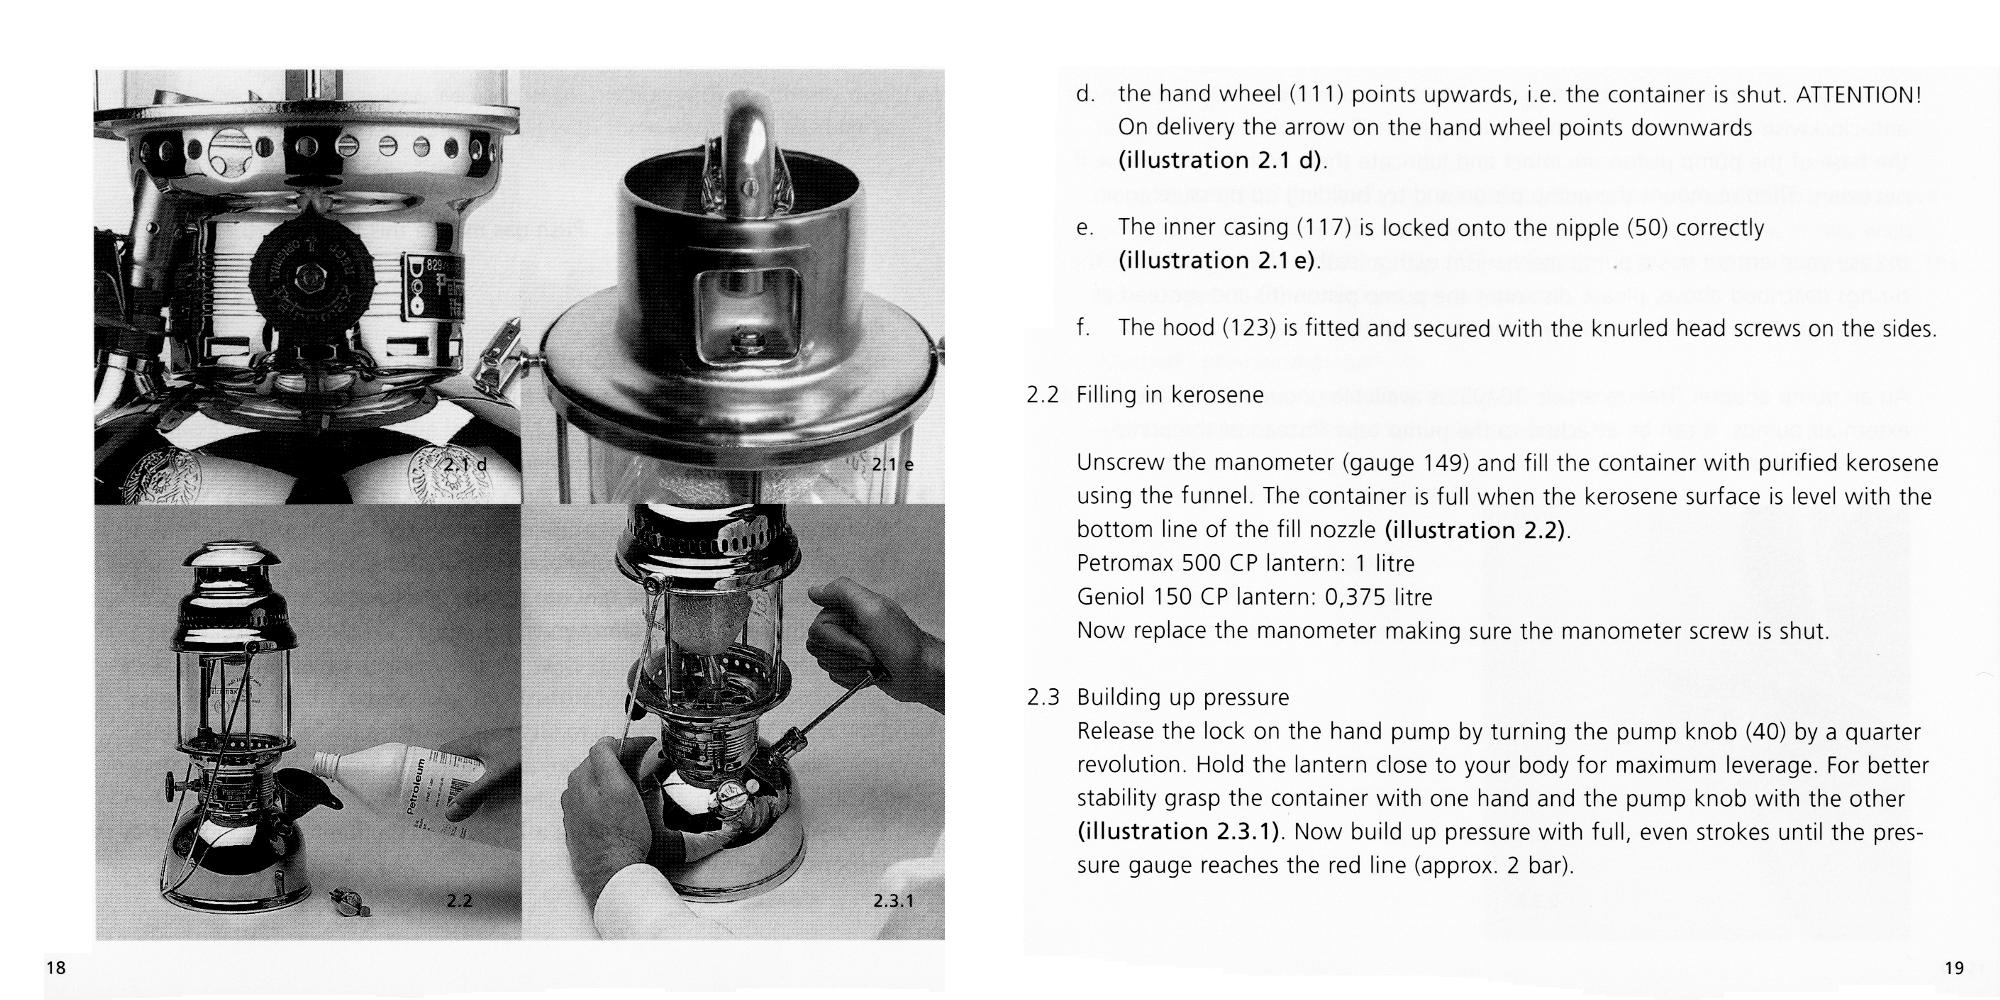 Petromax Instructions page 18 and 19